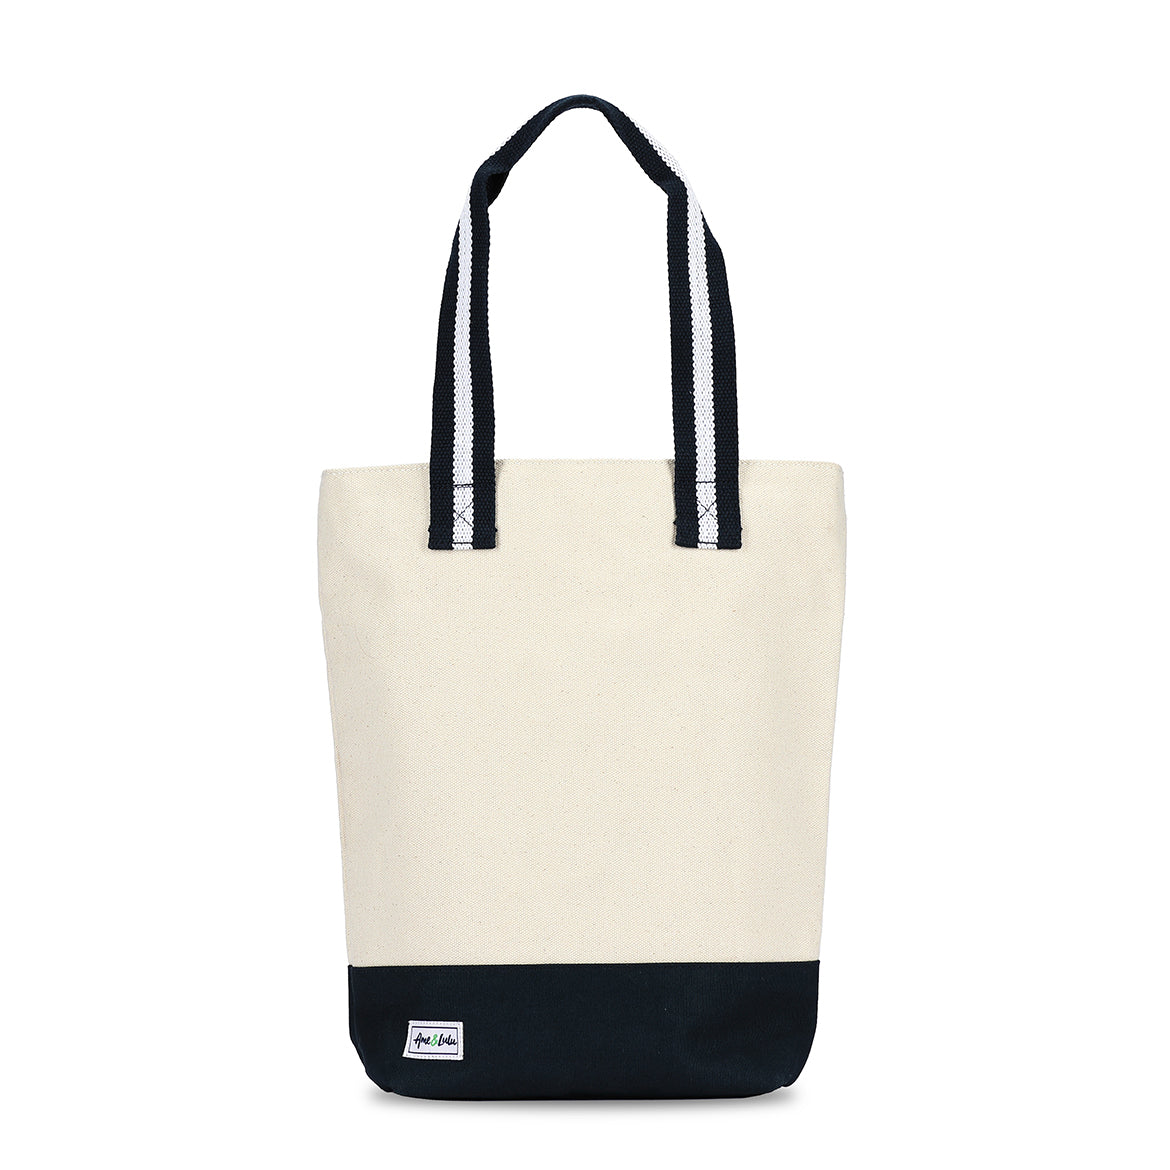 natural canvas wine tote with navy and white cotton webbing straps and navy canvas at the bottom